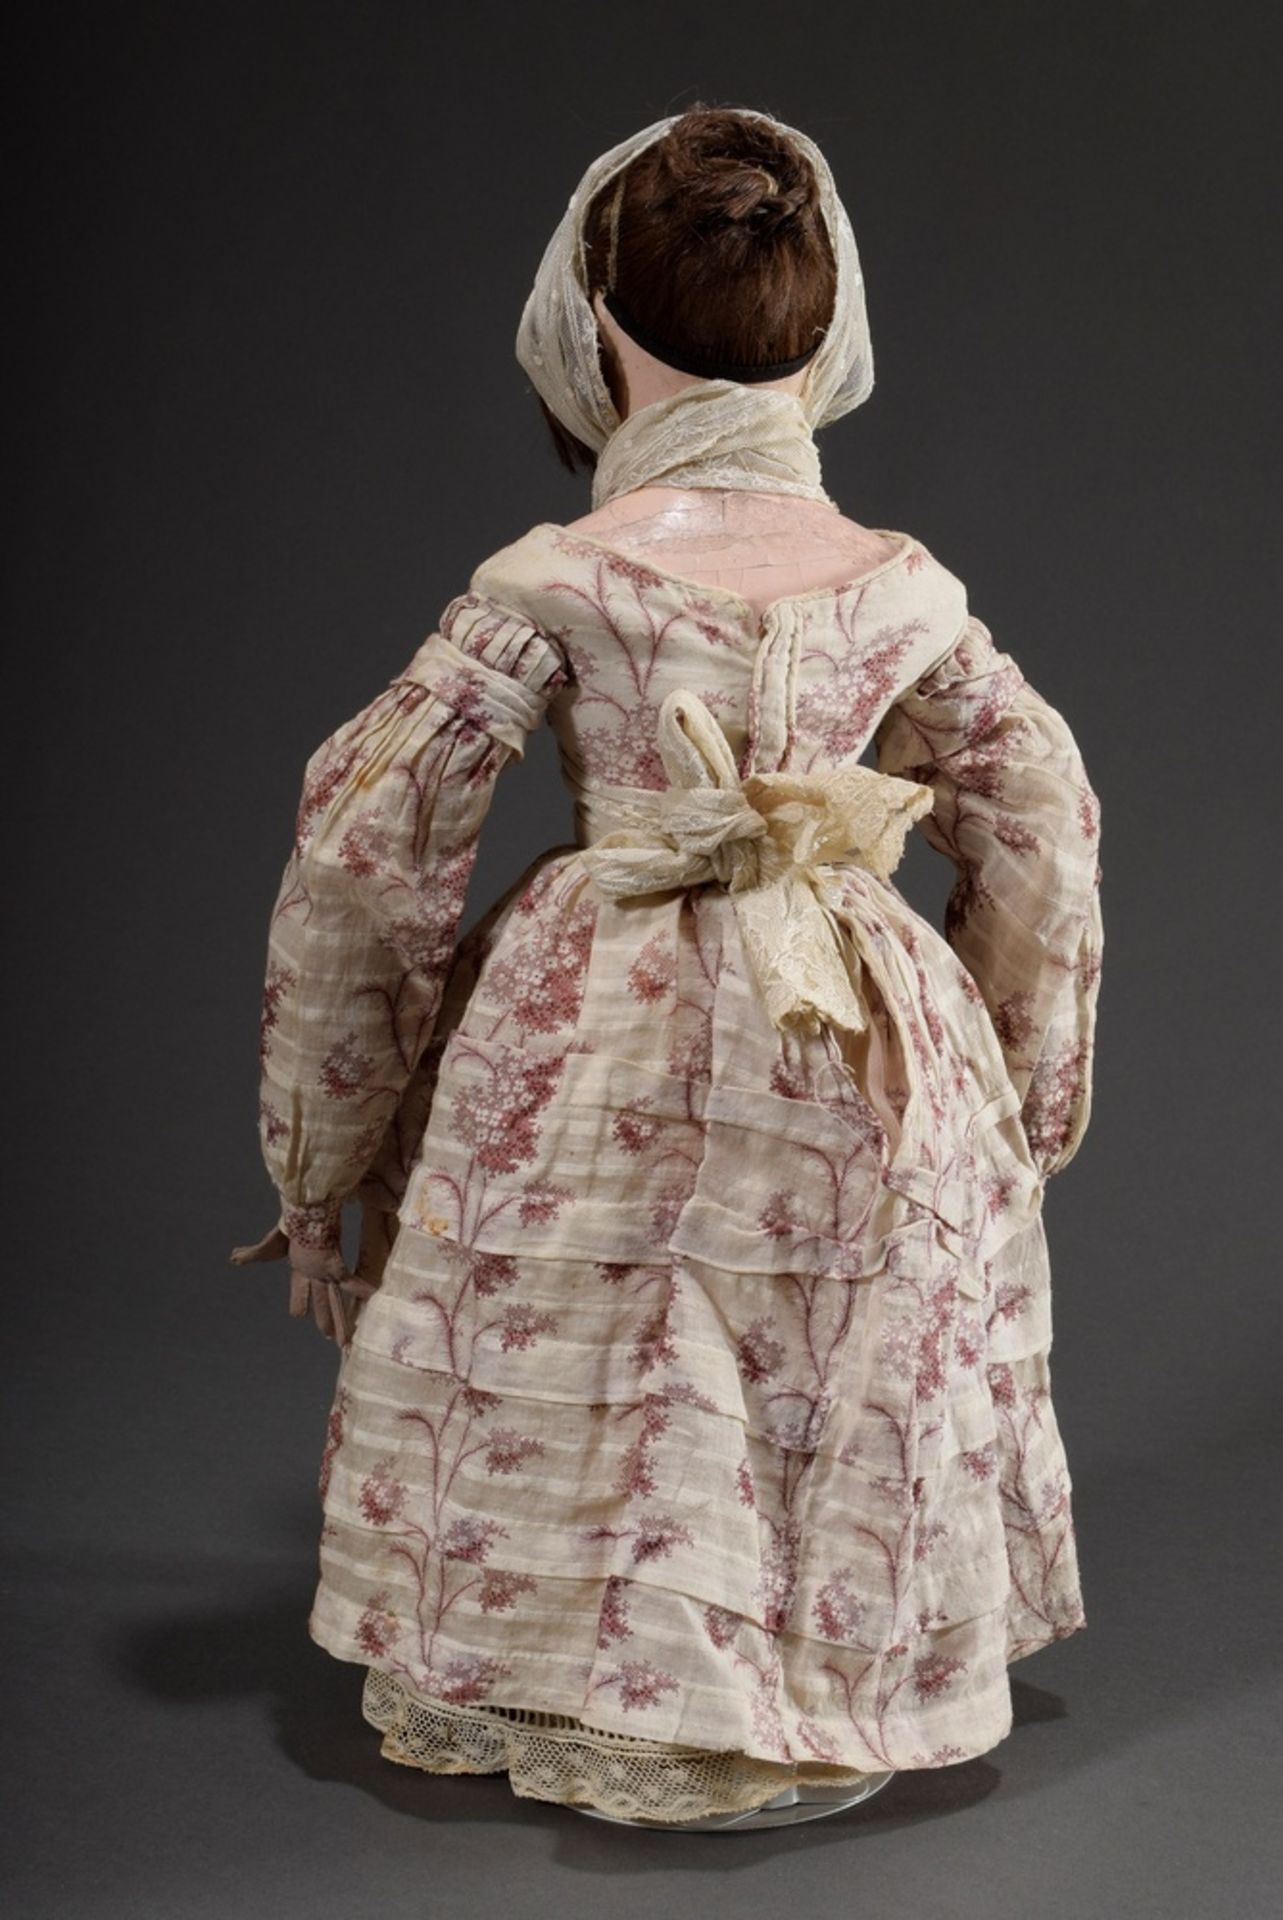 Early Biedermeier doll with papier-mâché breasthead, real hair and brown eyes, original clothing, c - Image 3 of 5